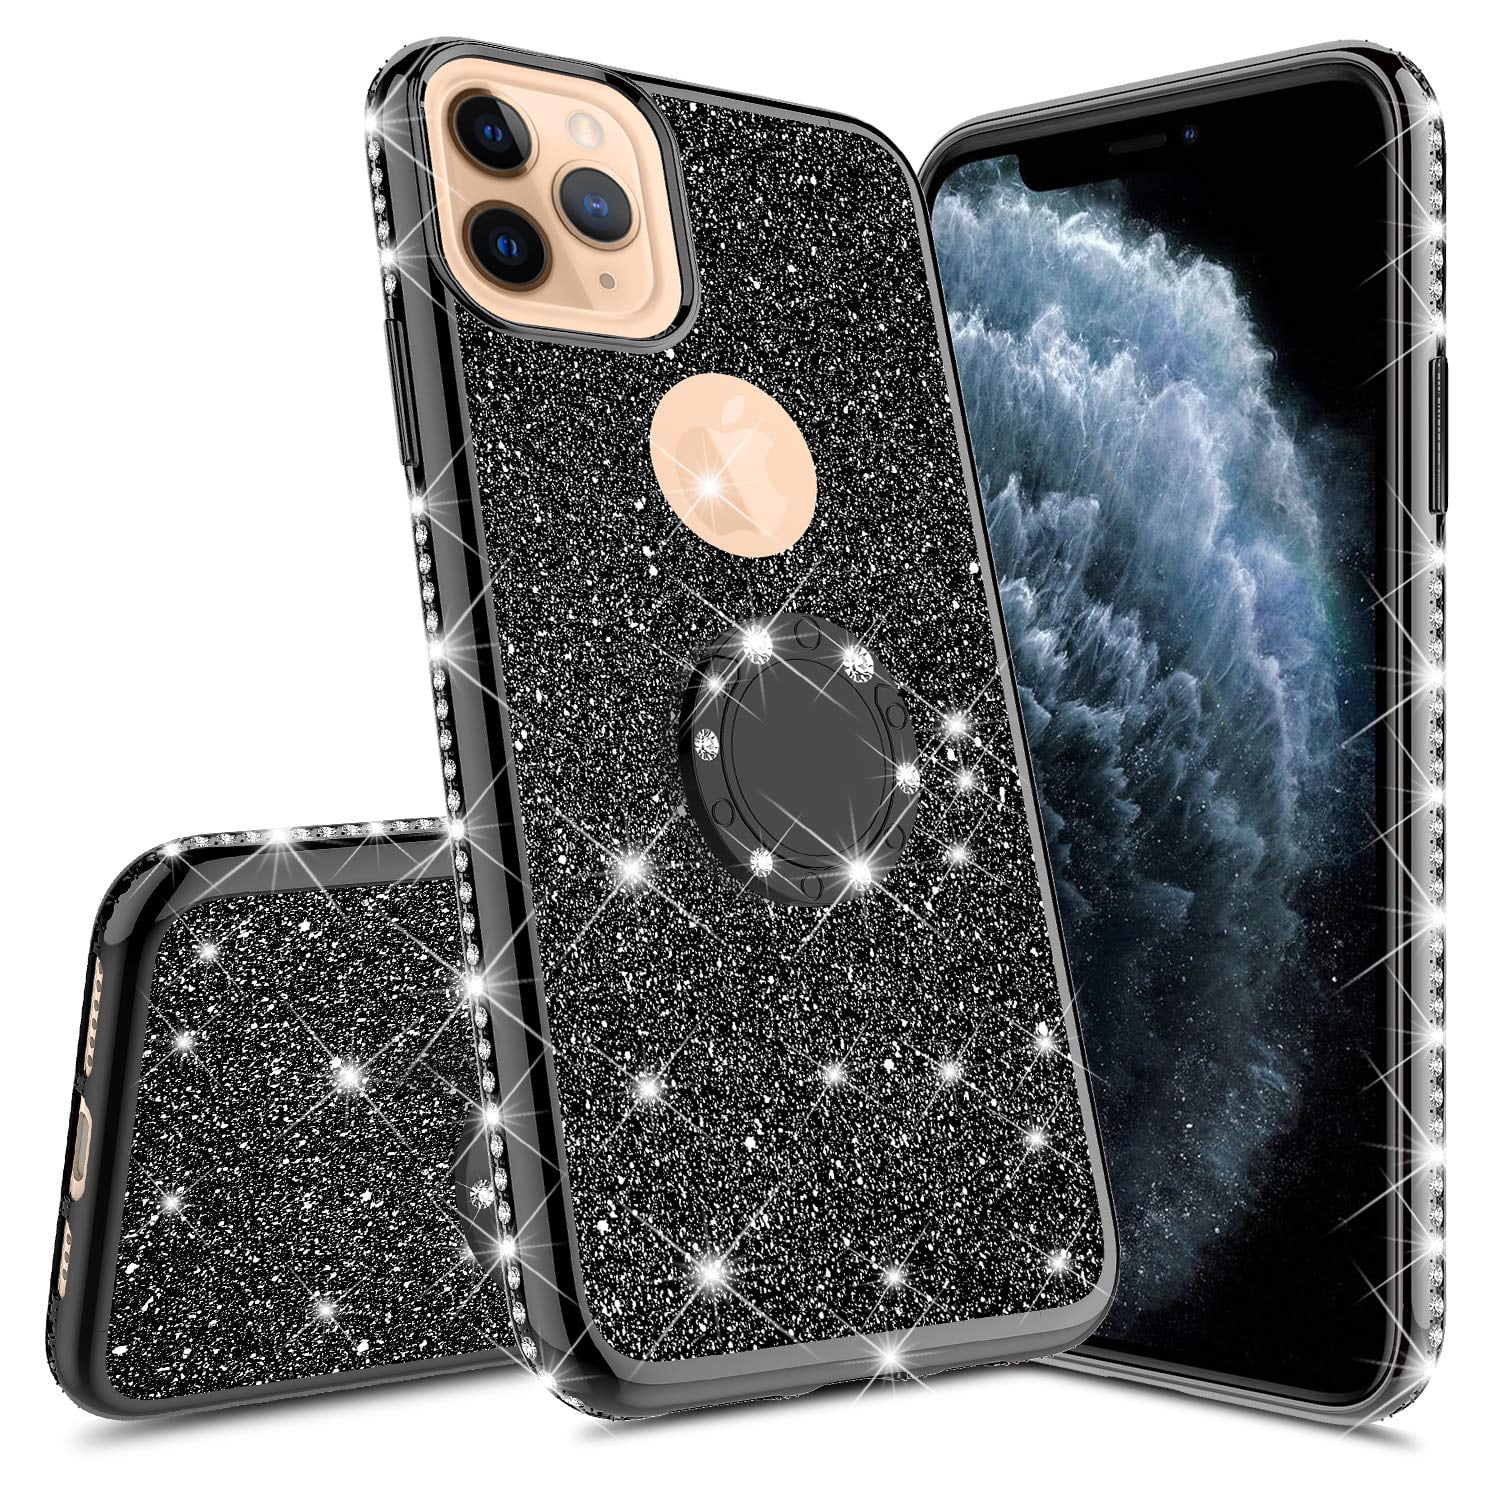 Aulzaju for iPhone 11 Pro Max Case for Women iPhone 11 Pro Max Cute Case with Ring Kickstand Bling Diamond Rhinestone Hard Protective Case Glitter Sparkle Love Design Luxury Fashion Girly Case 6.5'' 